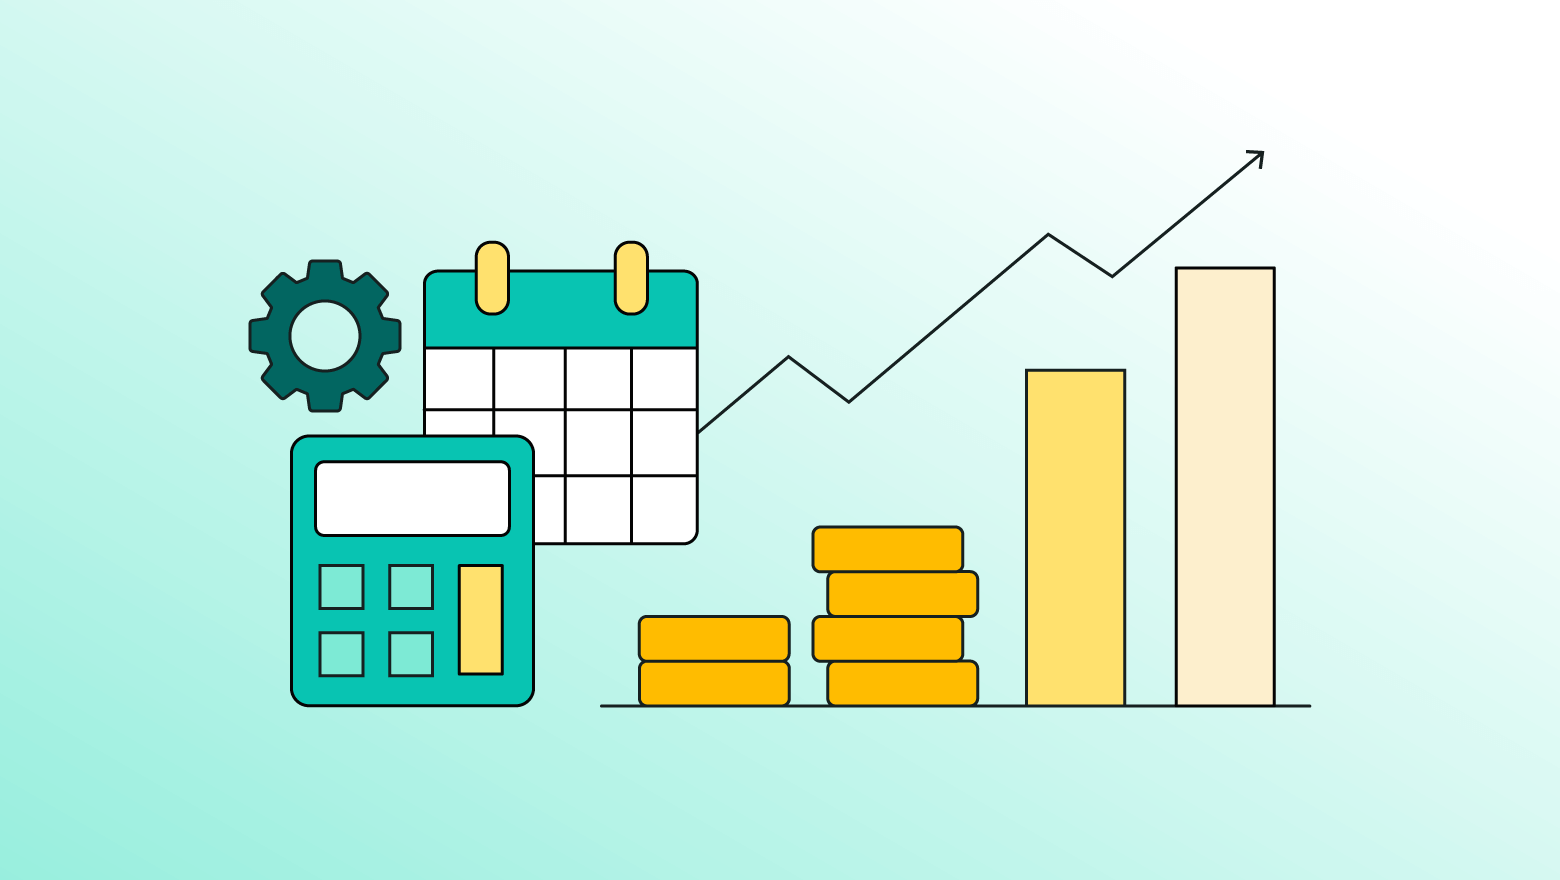 An illustration showing a calculator to measure return on investment, a content calendar, bar graphs and social tasks iconography depicting social budget optimization.